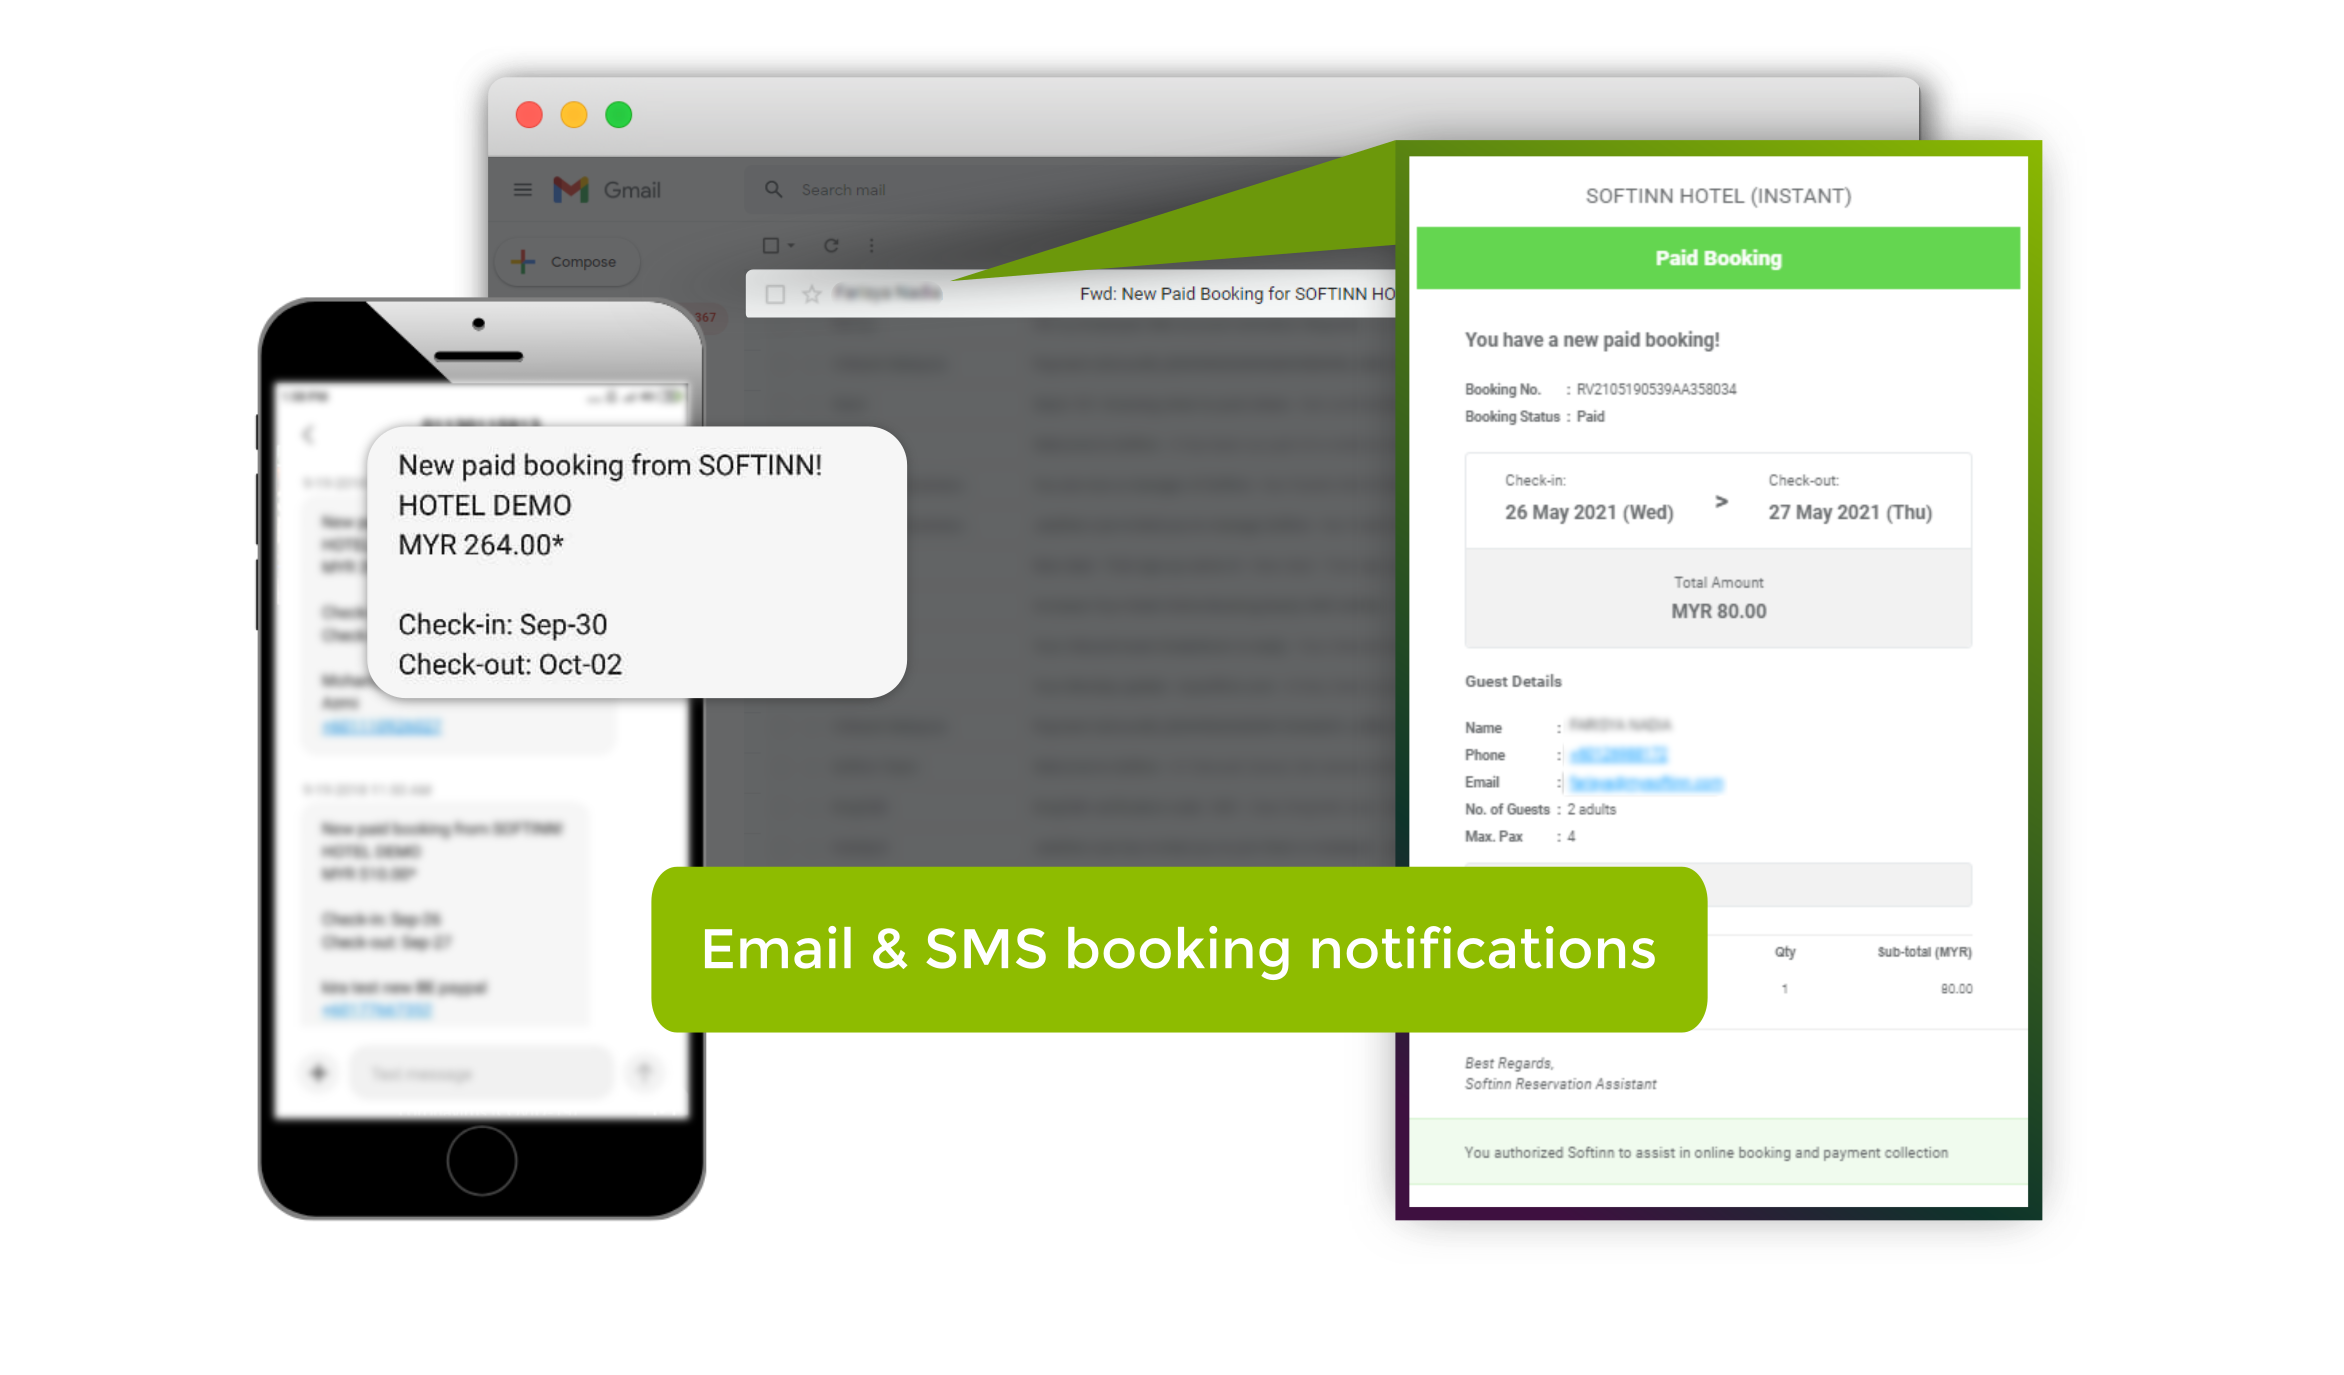 Email and SMS booking notifications